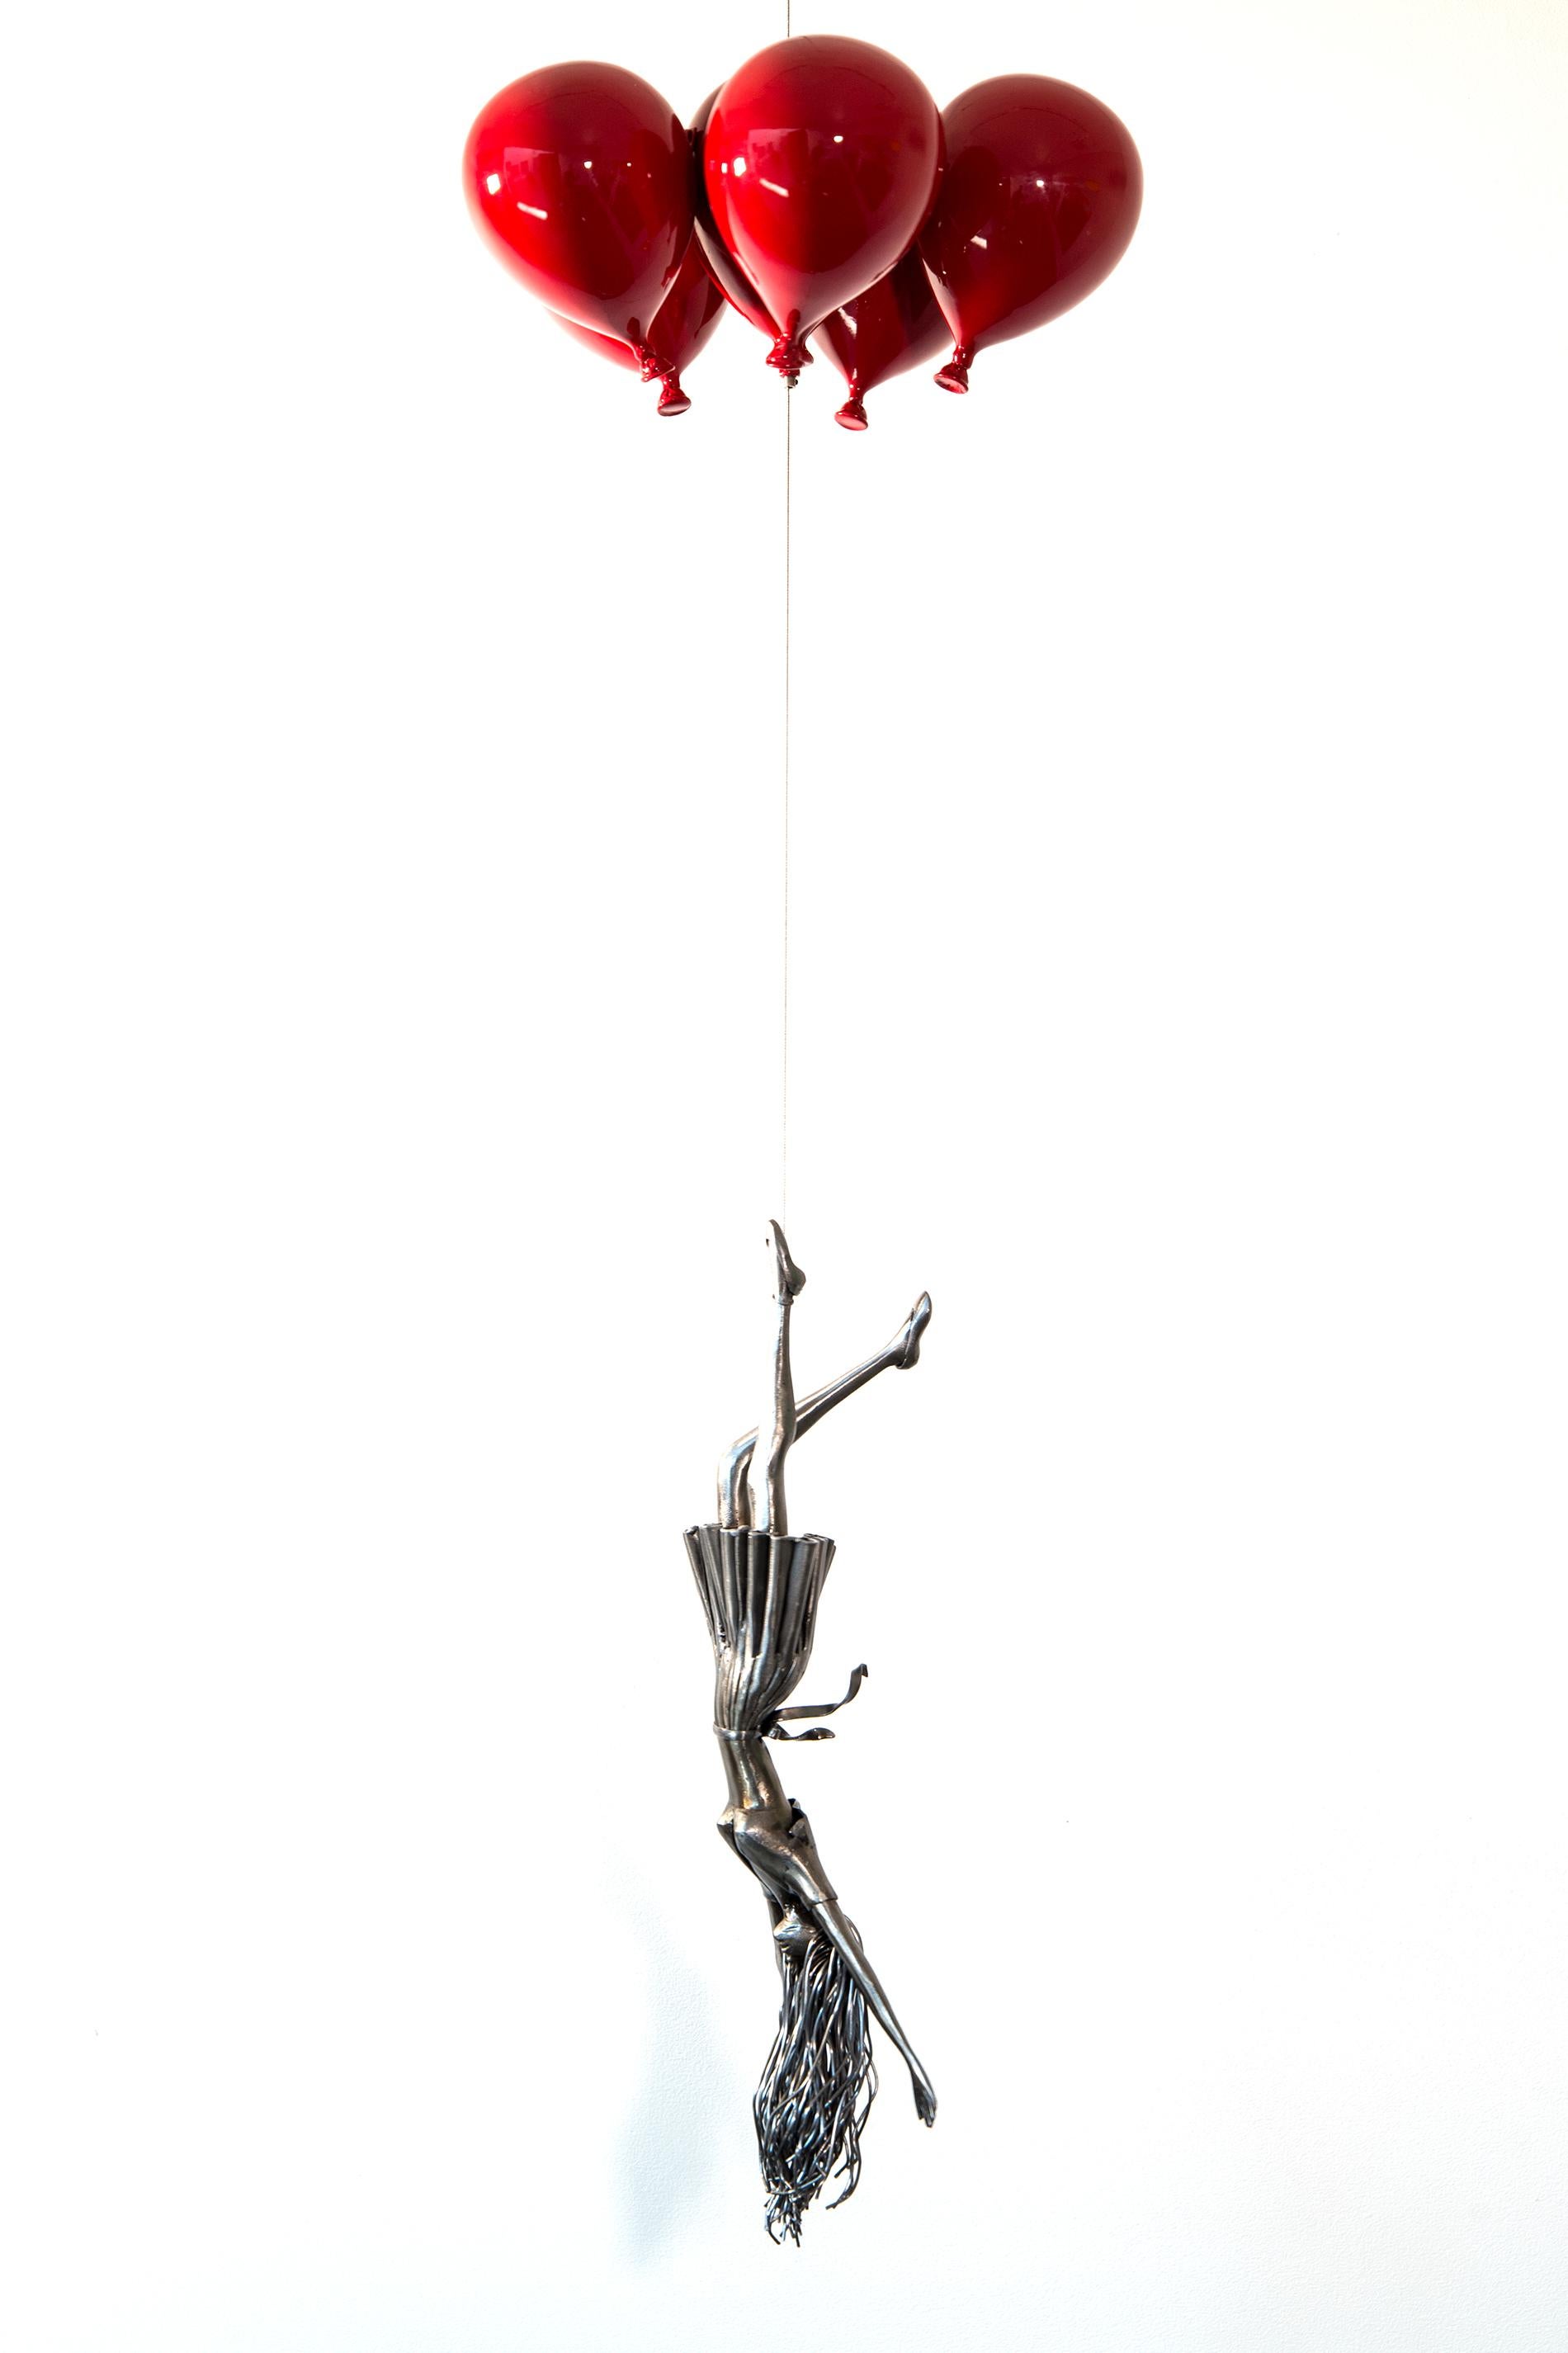 Red Line - woman, figure, steel, colorful, balloons, suspended sculpture - Mixed Media Art by Derya Ozparlak